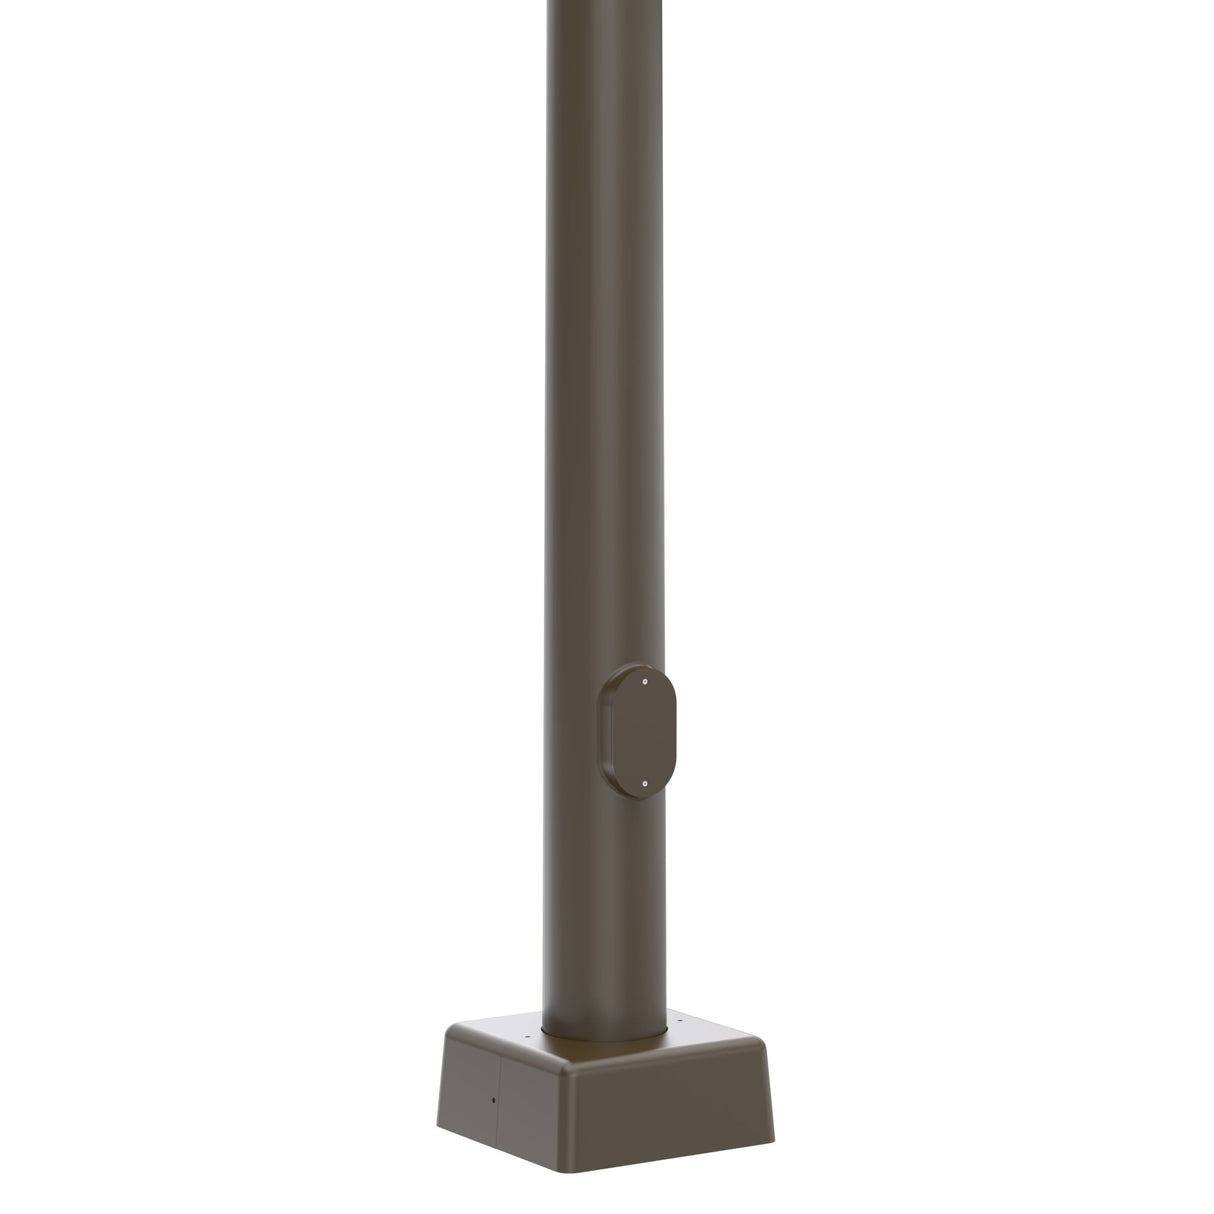 25' Tall x 5.9" Base OD x 2.4.0" Top OD x 11ga Thick, Round Tapered Steel, Anchor Base Light Pole